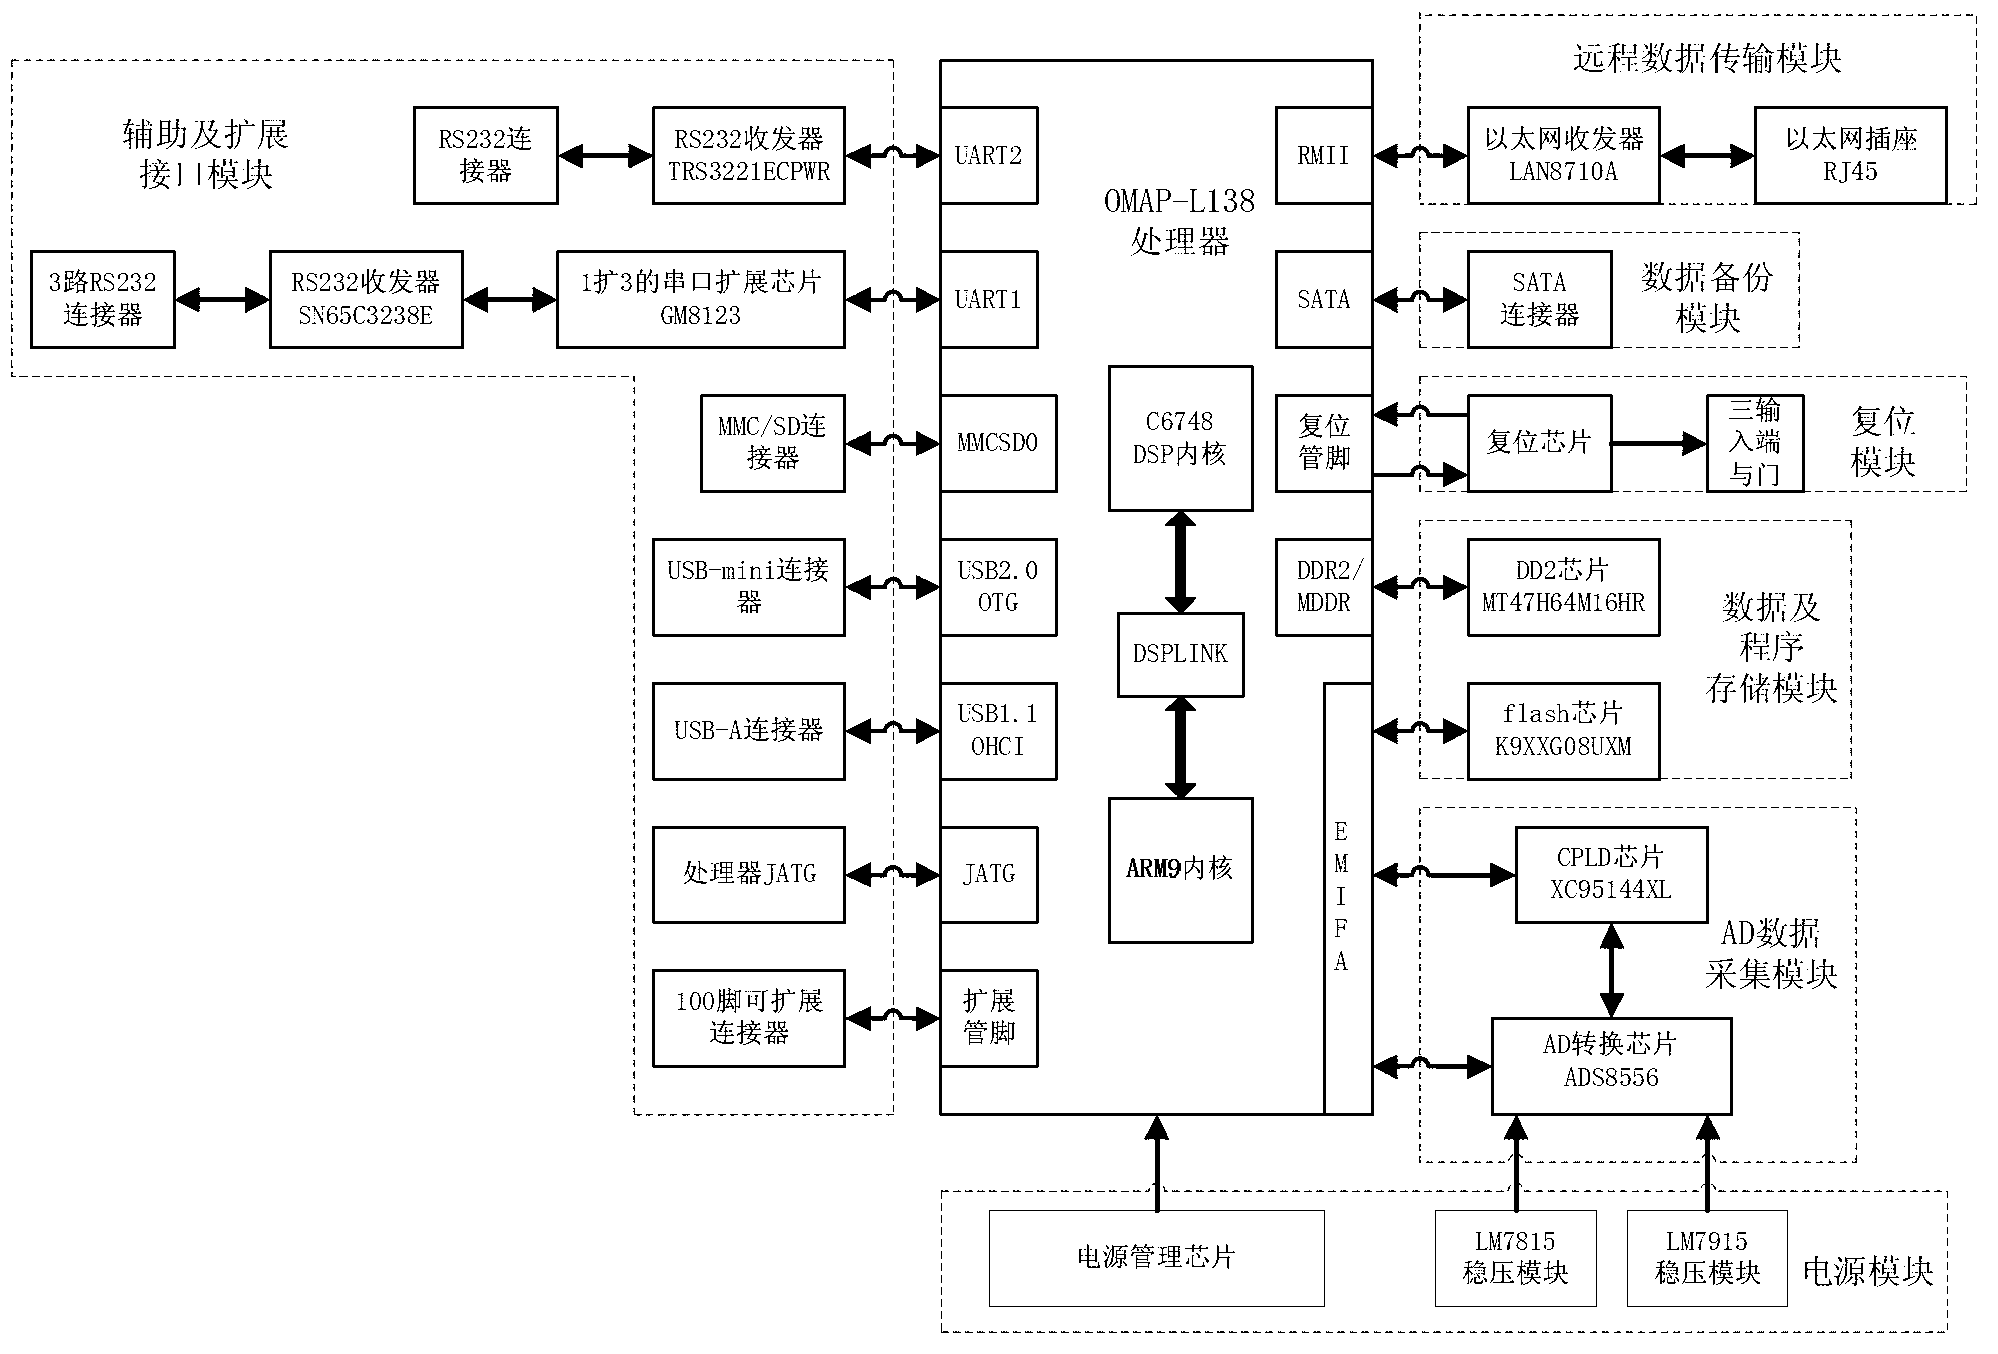 Acquisition and processing system of global system for mobile communications for railway (GSM-R) network interference signals